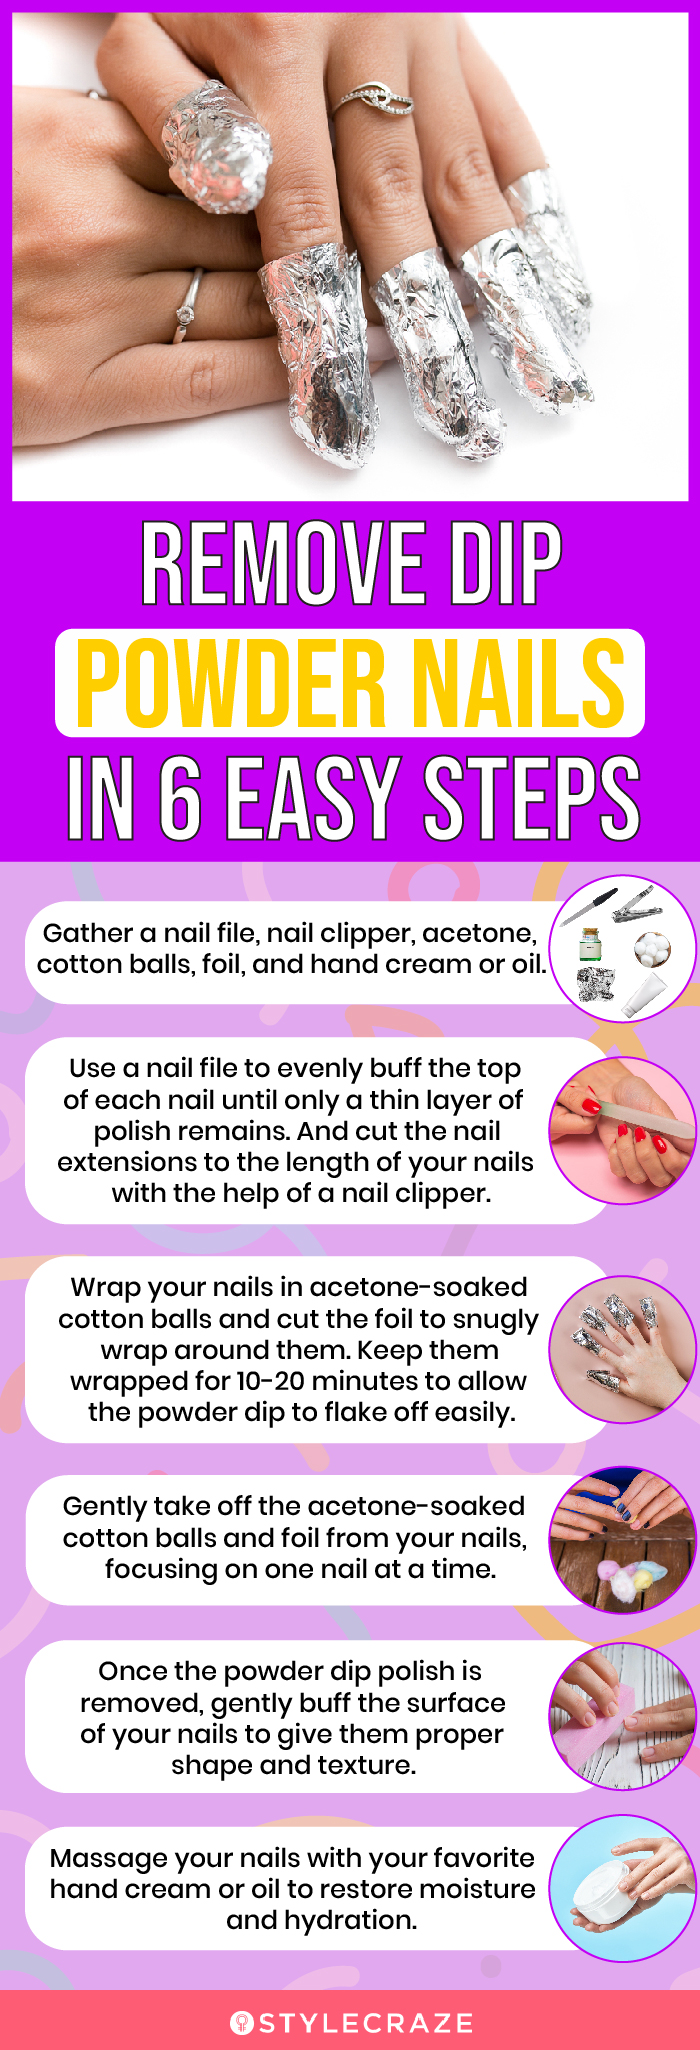 How to Remove Acrylics at Home in 10 Easy Steps